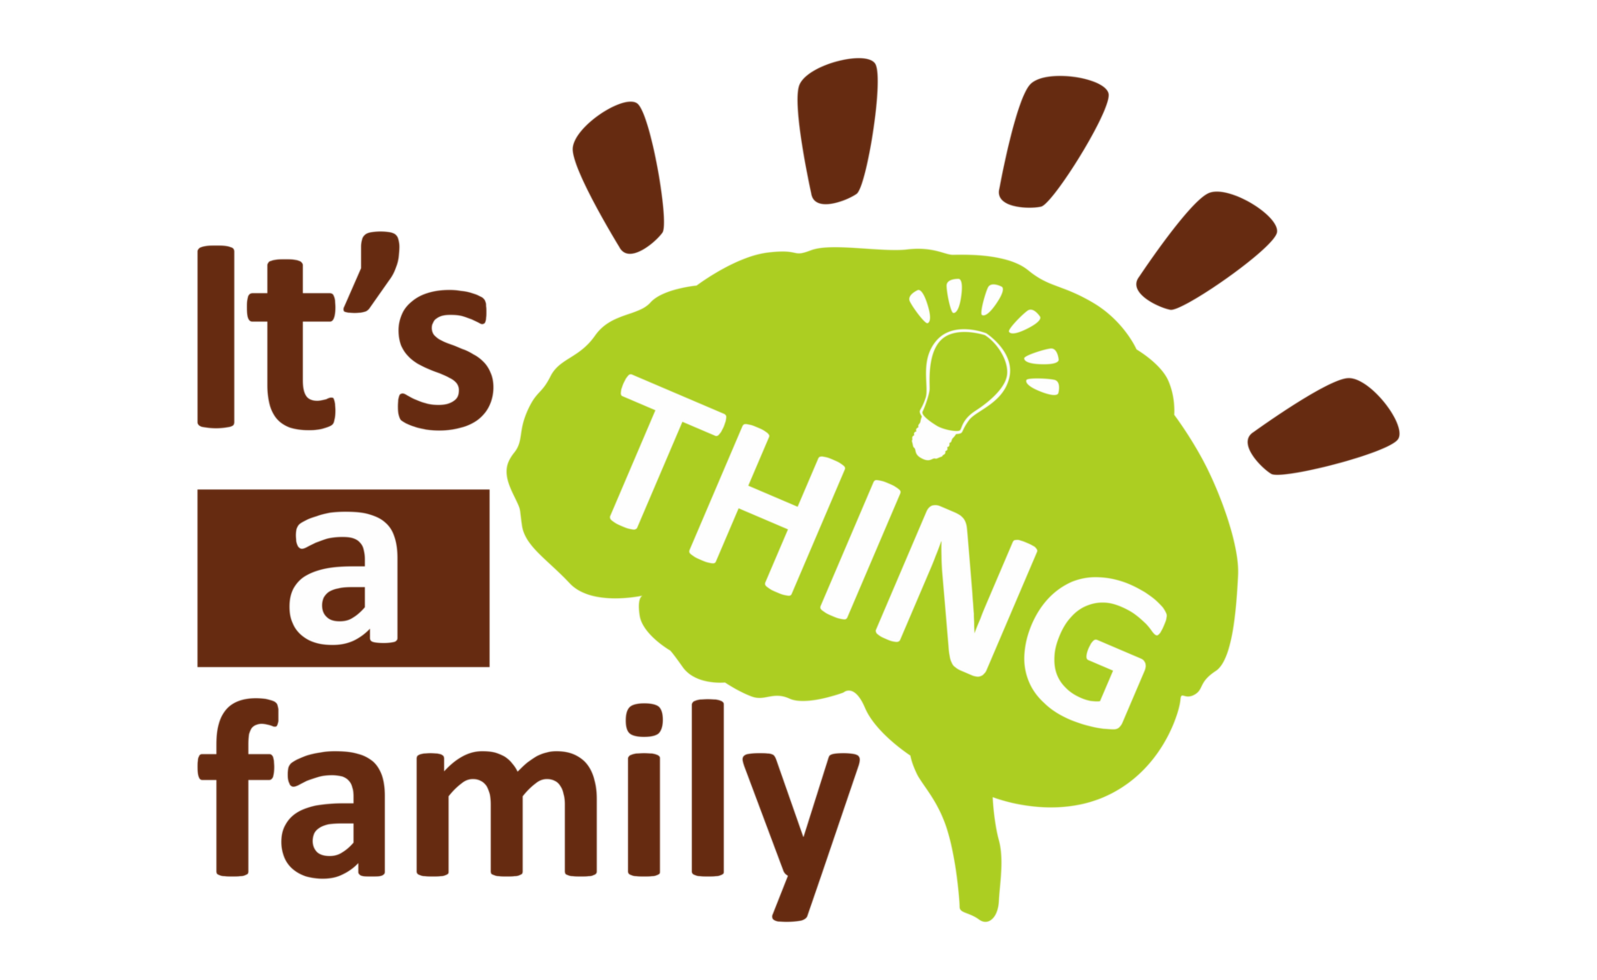 Family Quotes - it's a family think - On Transparent Background png